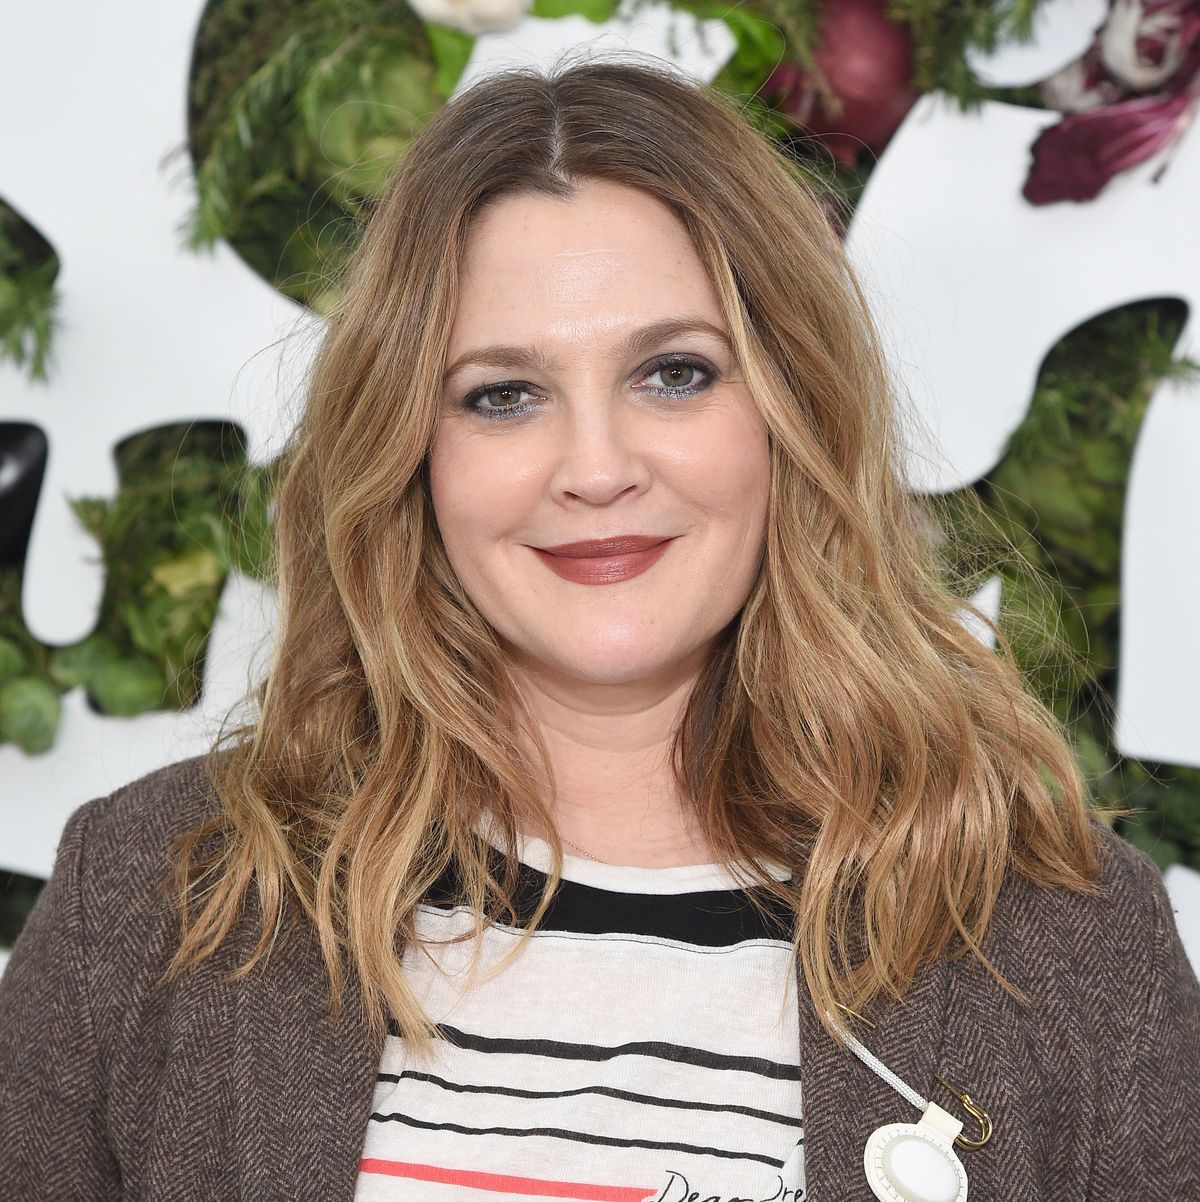 Drew Barrymore On Raising Her Daughters To Feel Beautiful